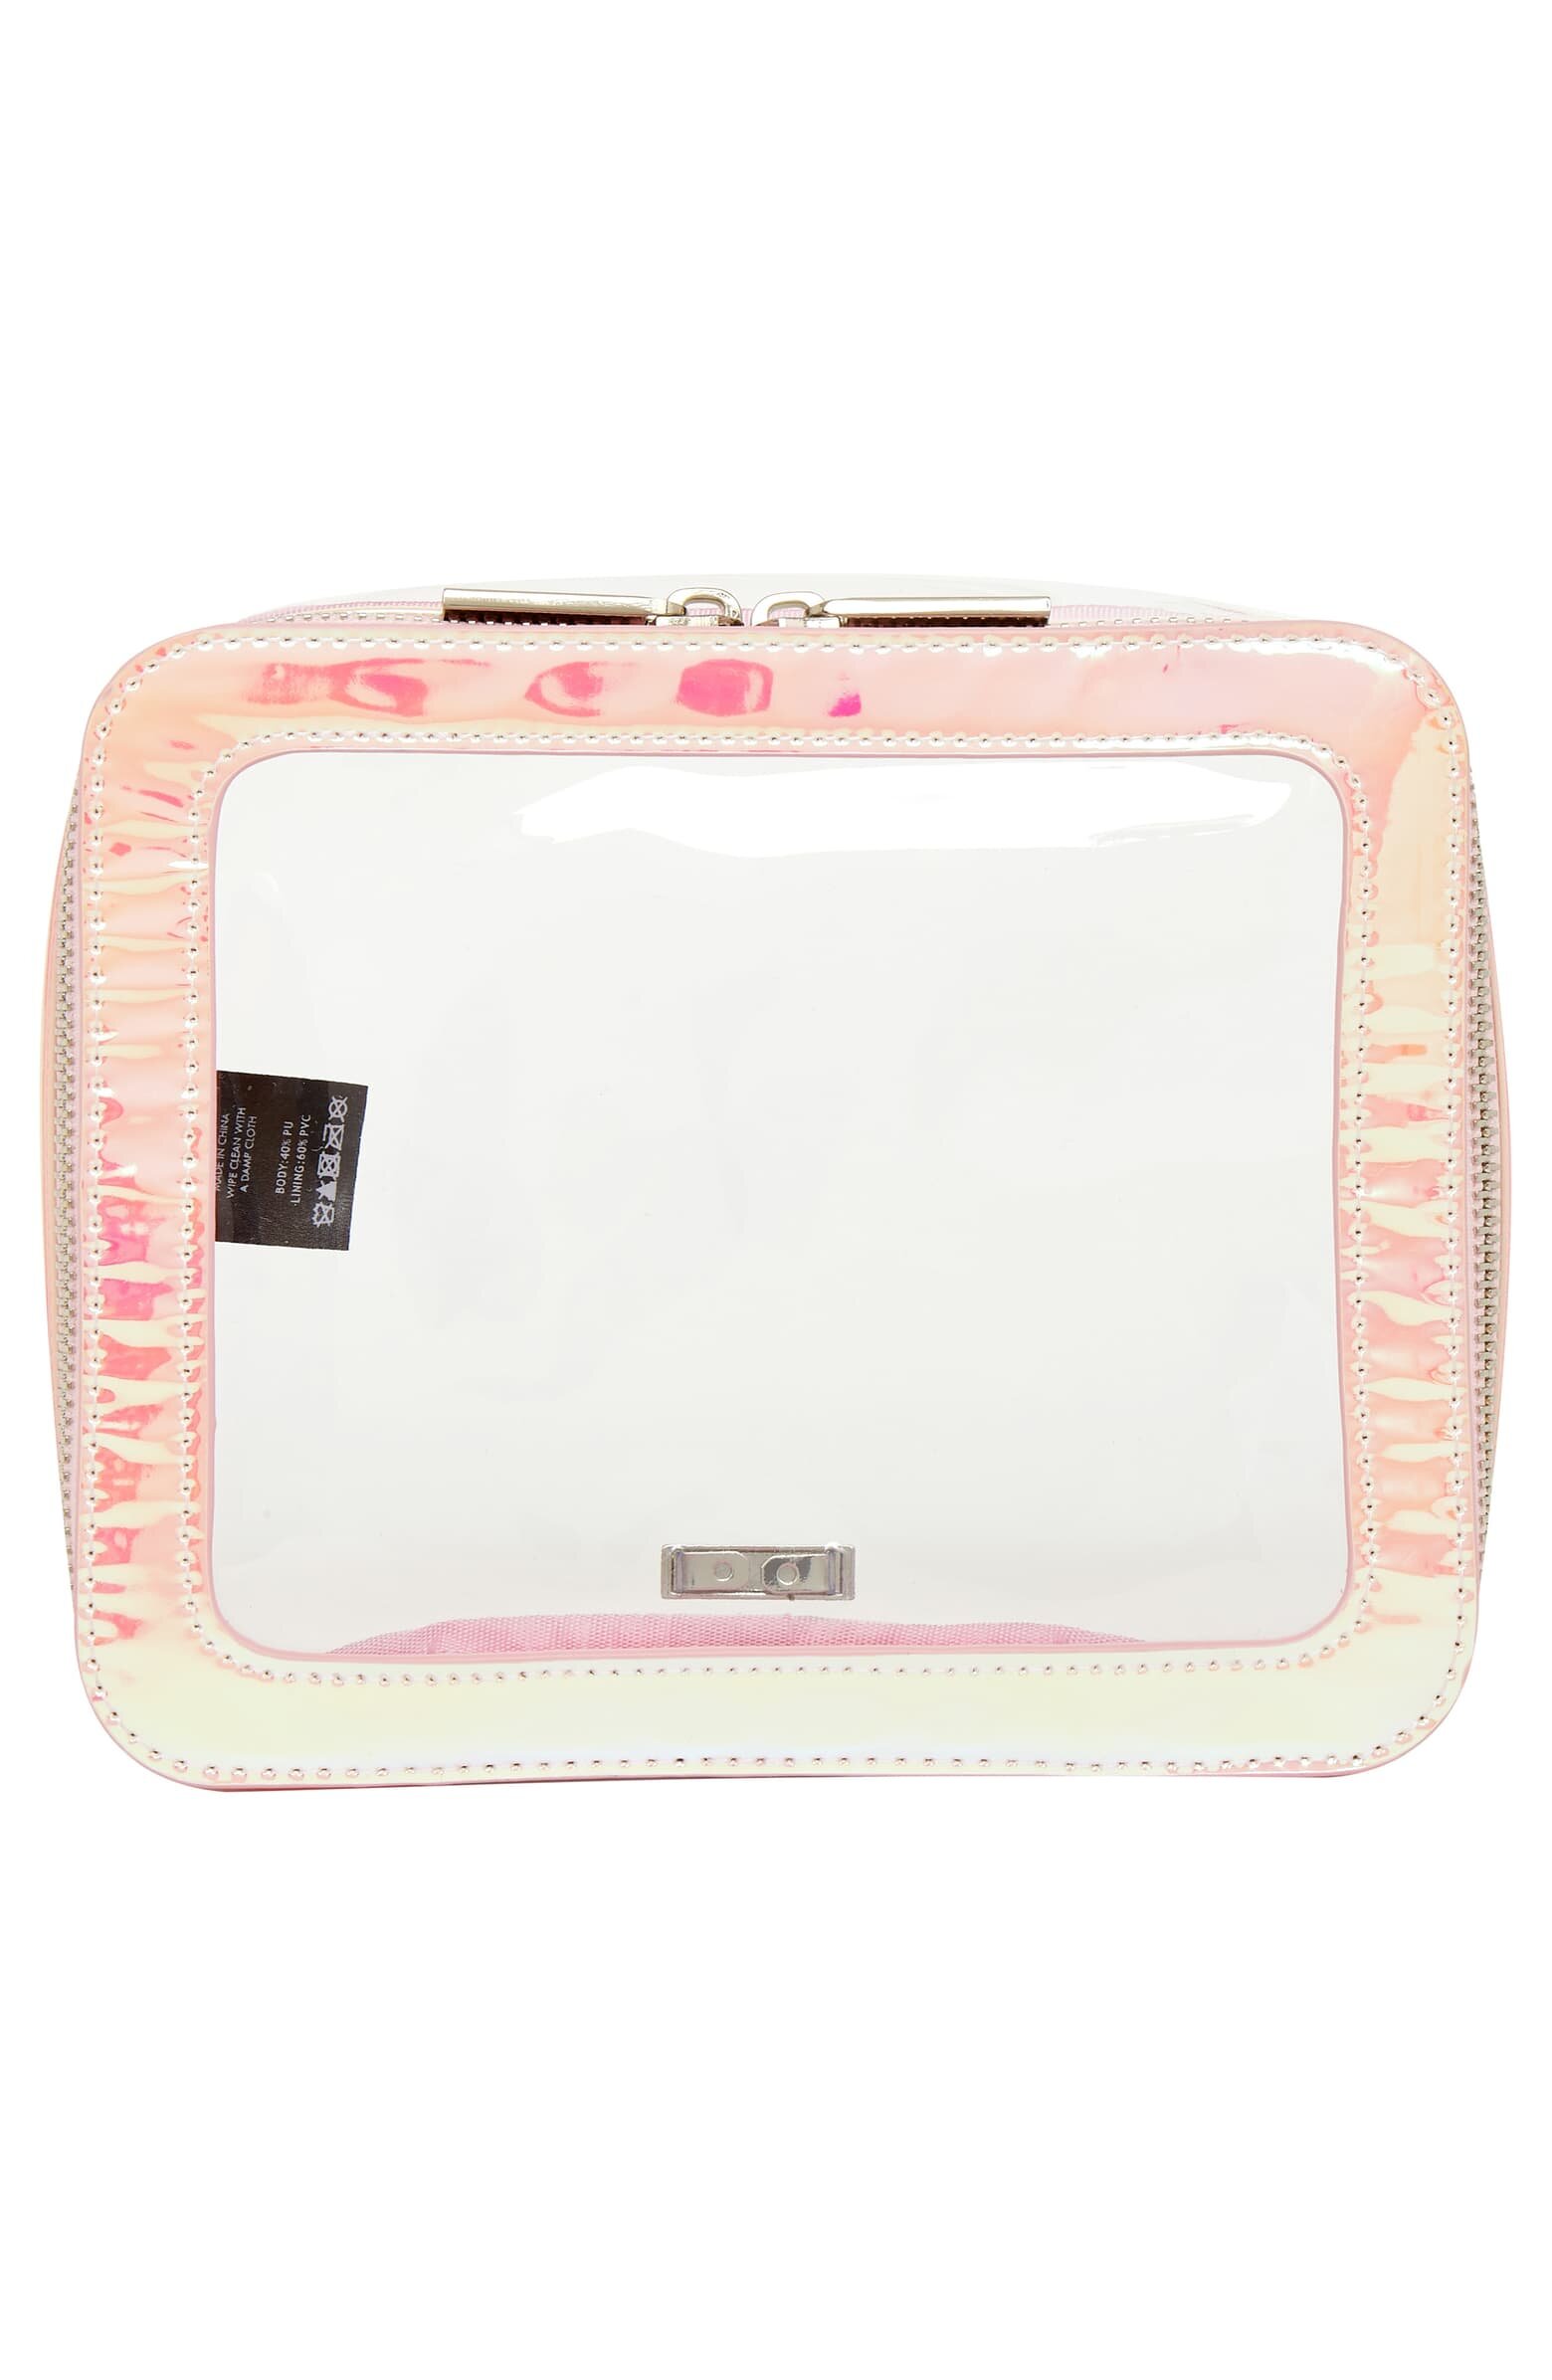 Skinnydip Holographic Clear Makeup Bag